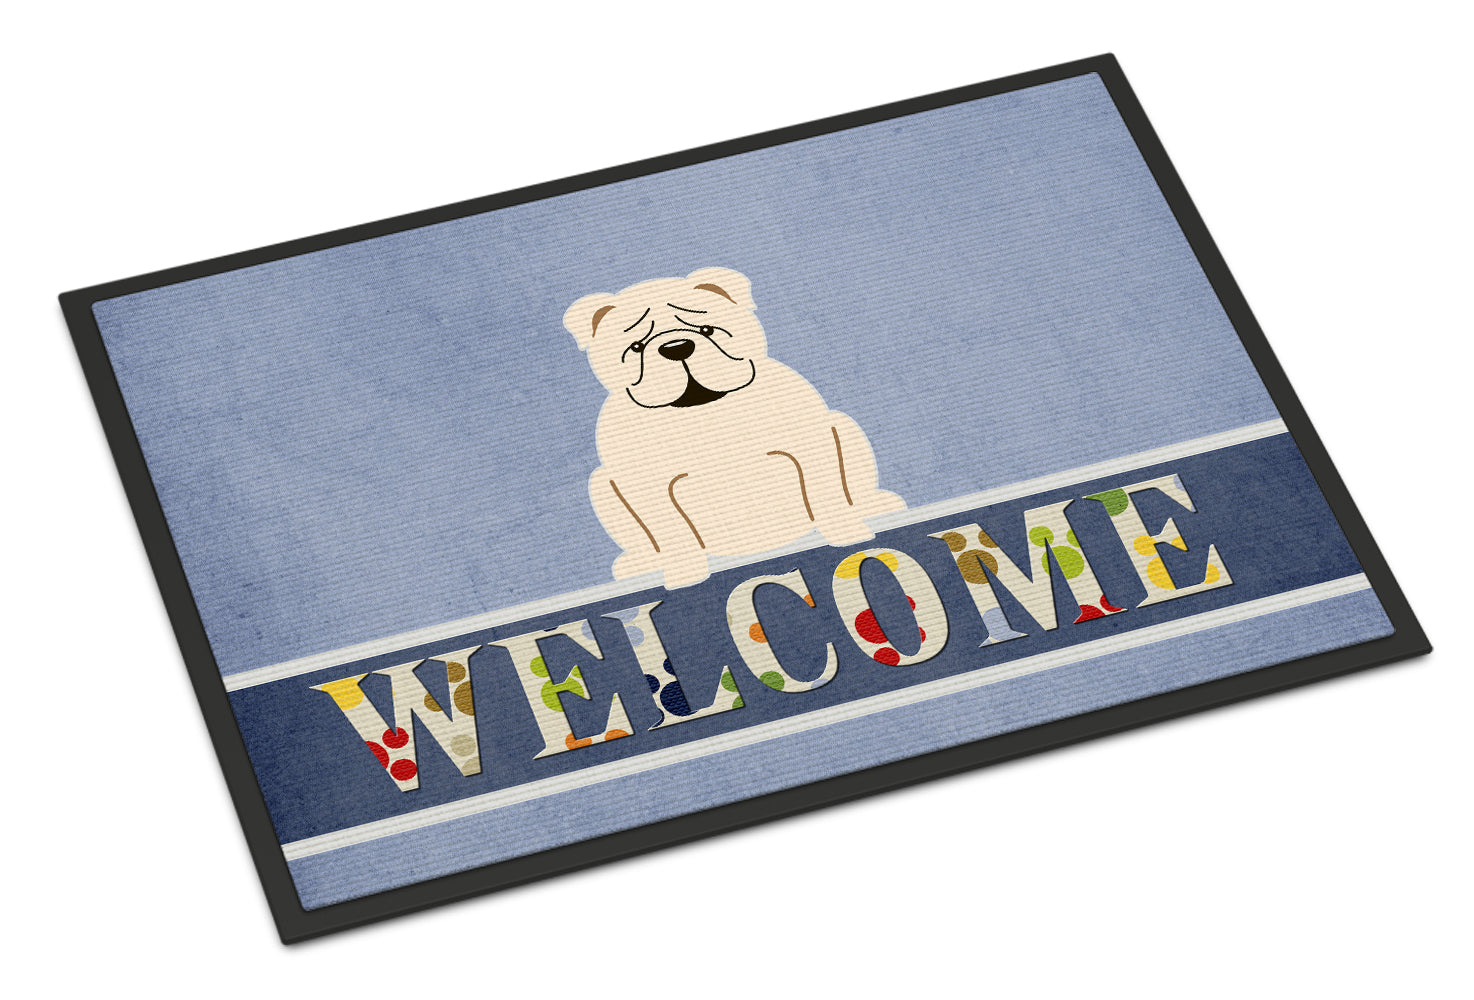 English Bulldog White Welcome Indoor or Outdoor Mat 18x27 BB5704MAT - the-store.com